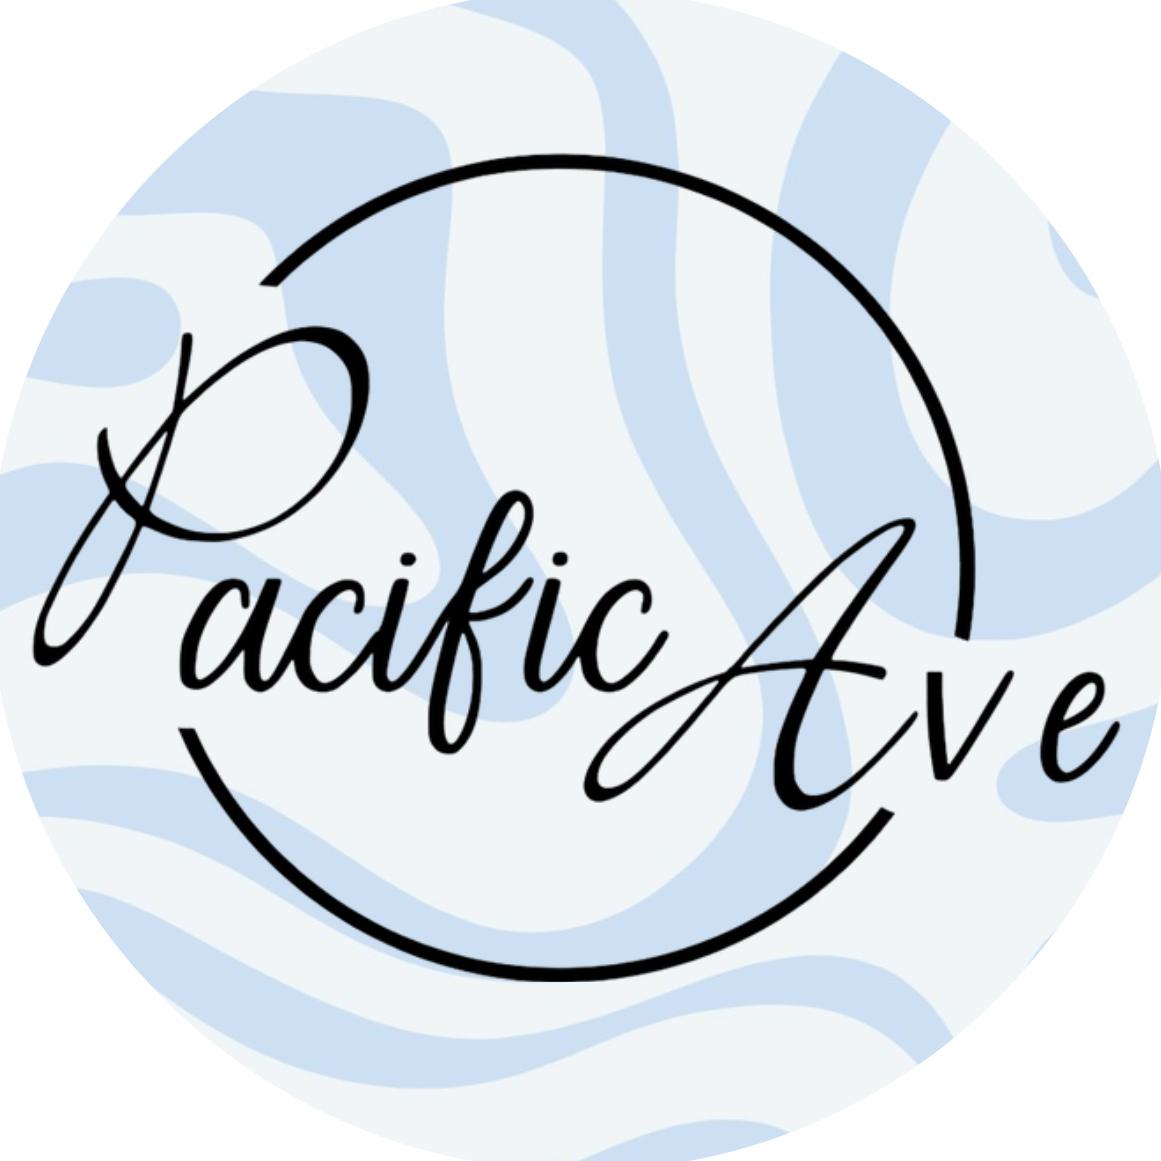 Pacific Ave's images